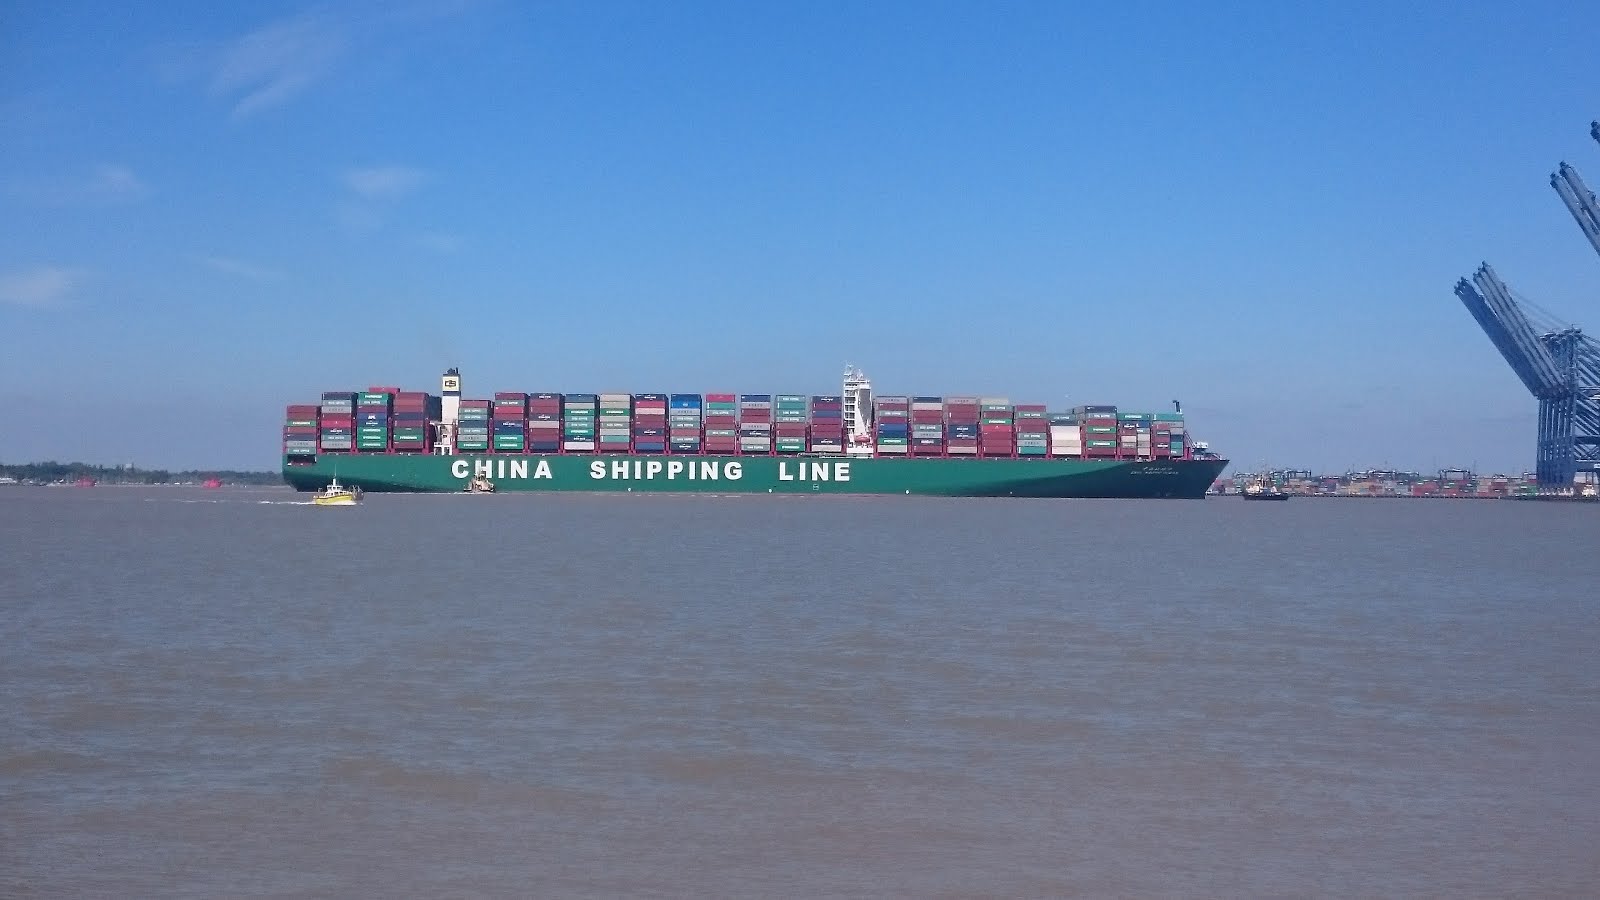 CSCL Arctic Ocean Arriving at the Port of Felixstowe 10th May 2017